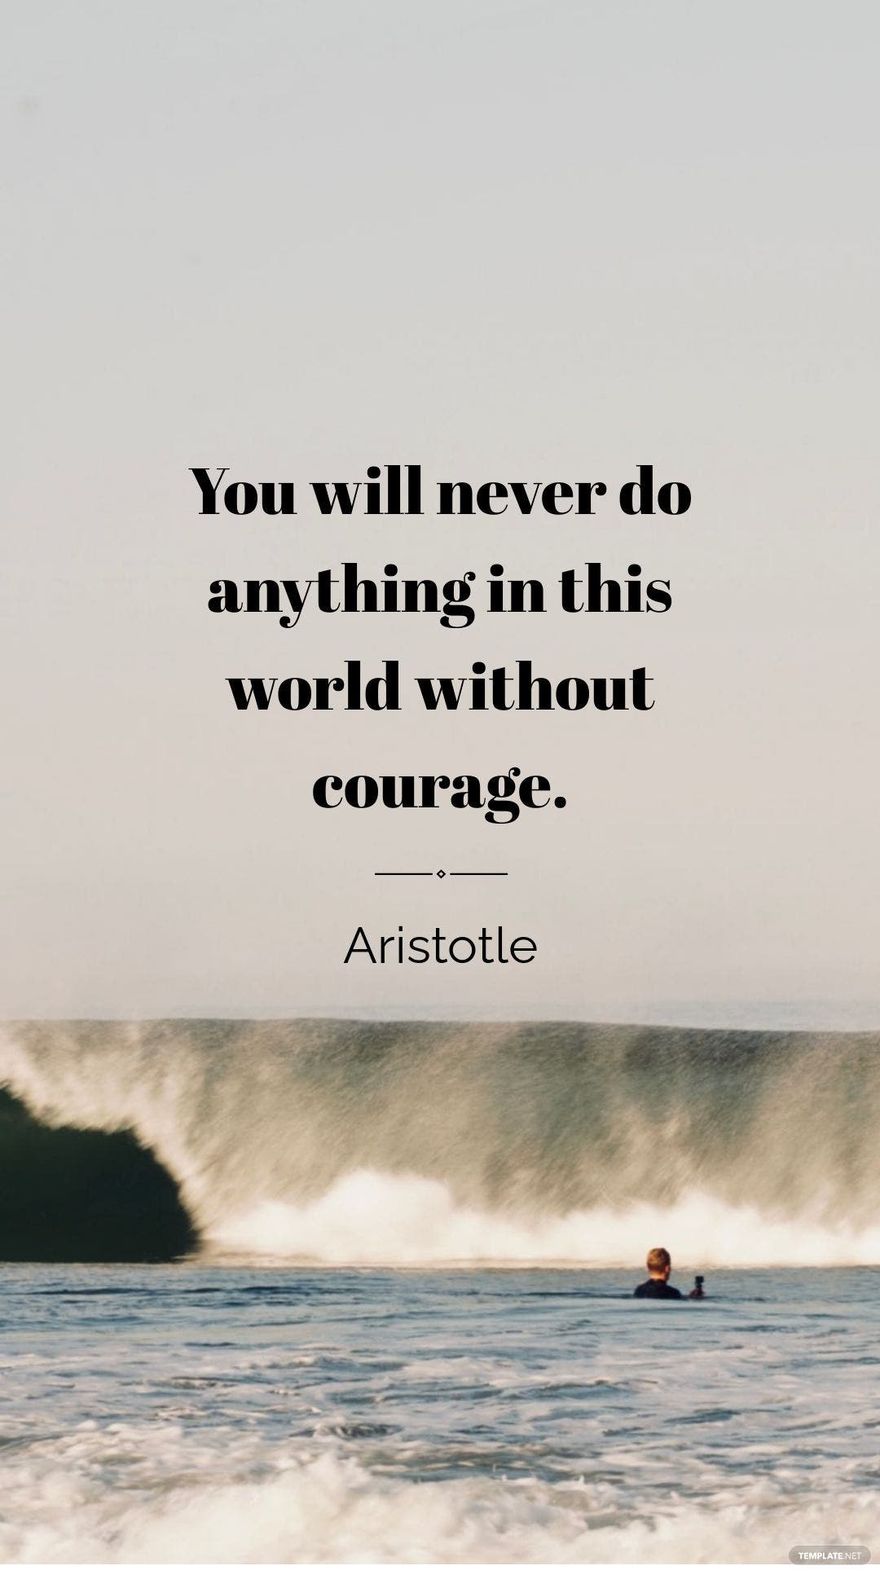 Free Aristotle - You will never do anything in this world without courage.